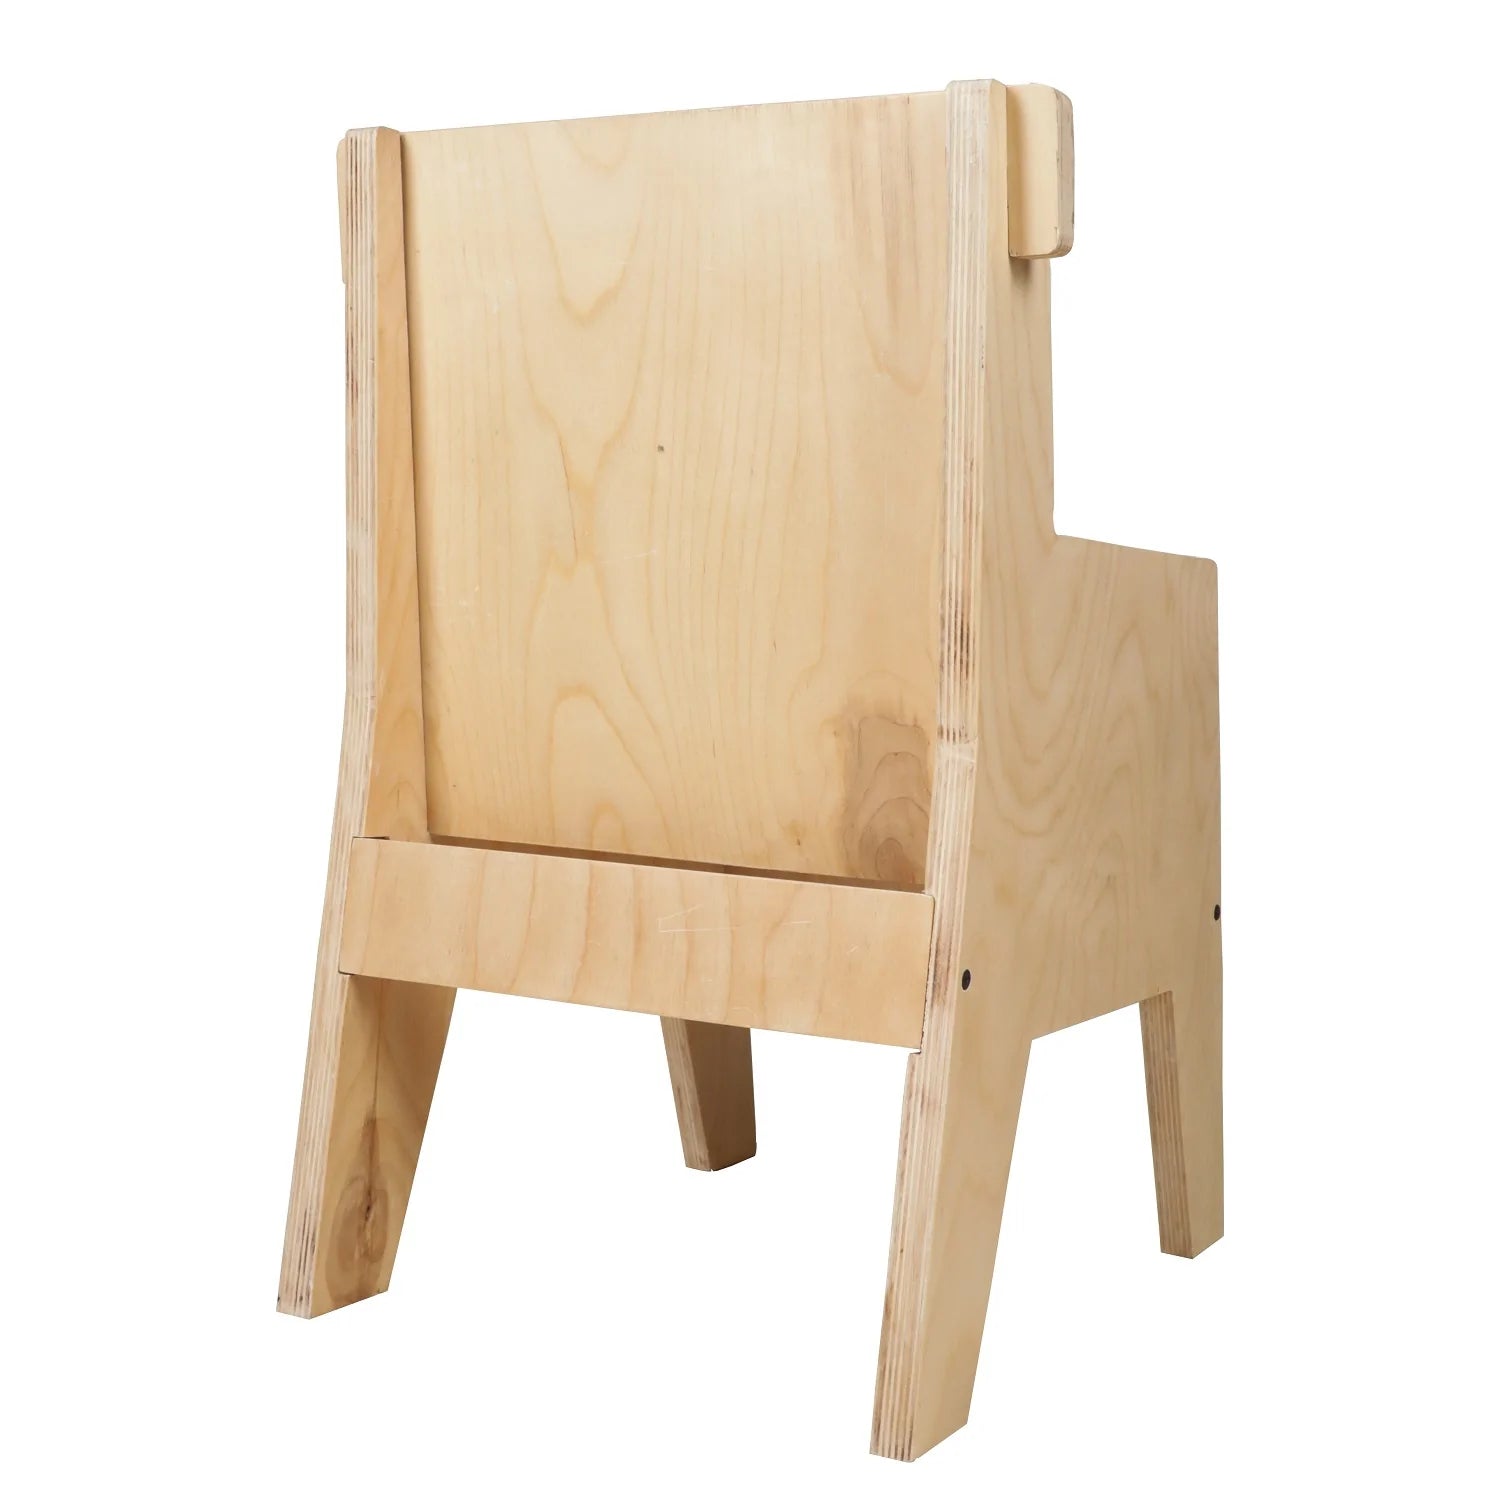 Buy Littles' Planet Montessori Wooden Arm Chair  - Position 3 - SkilloToys.com